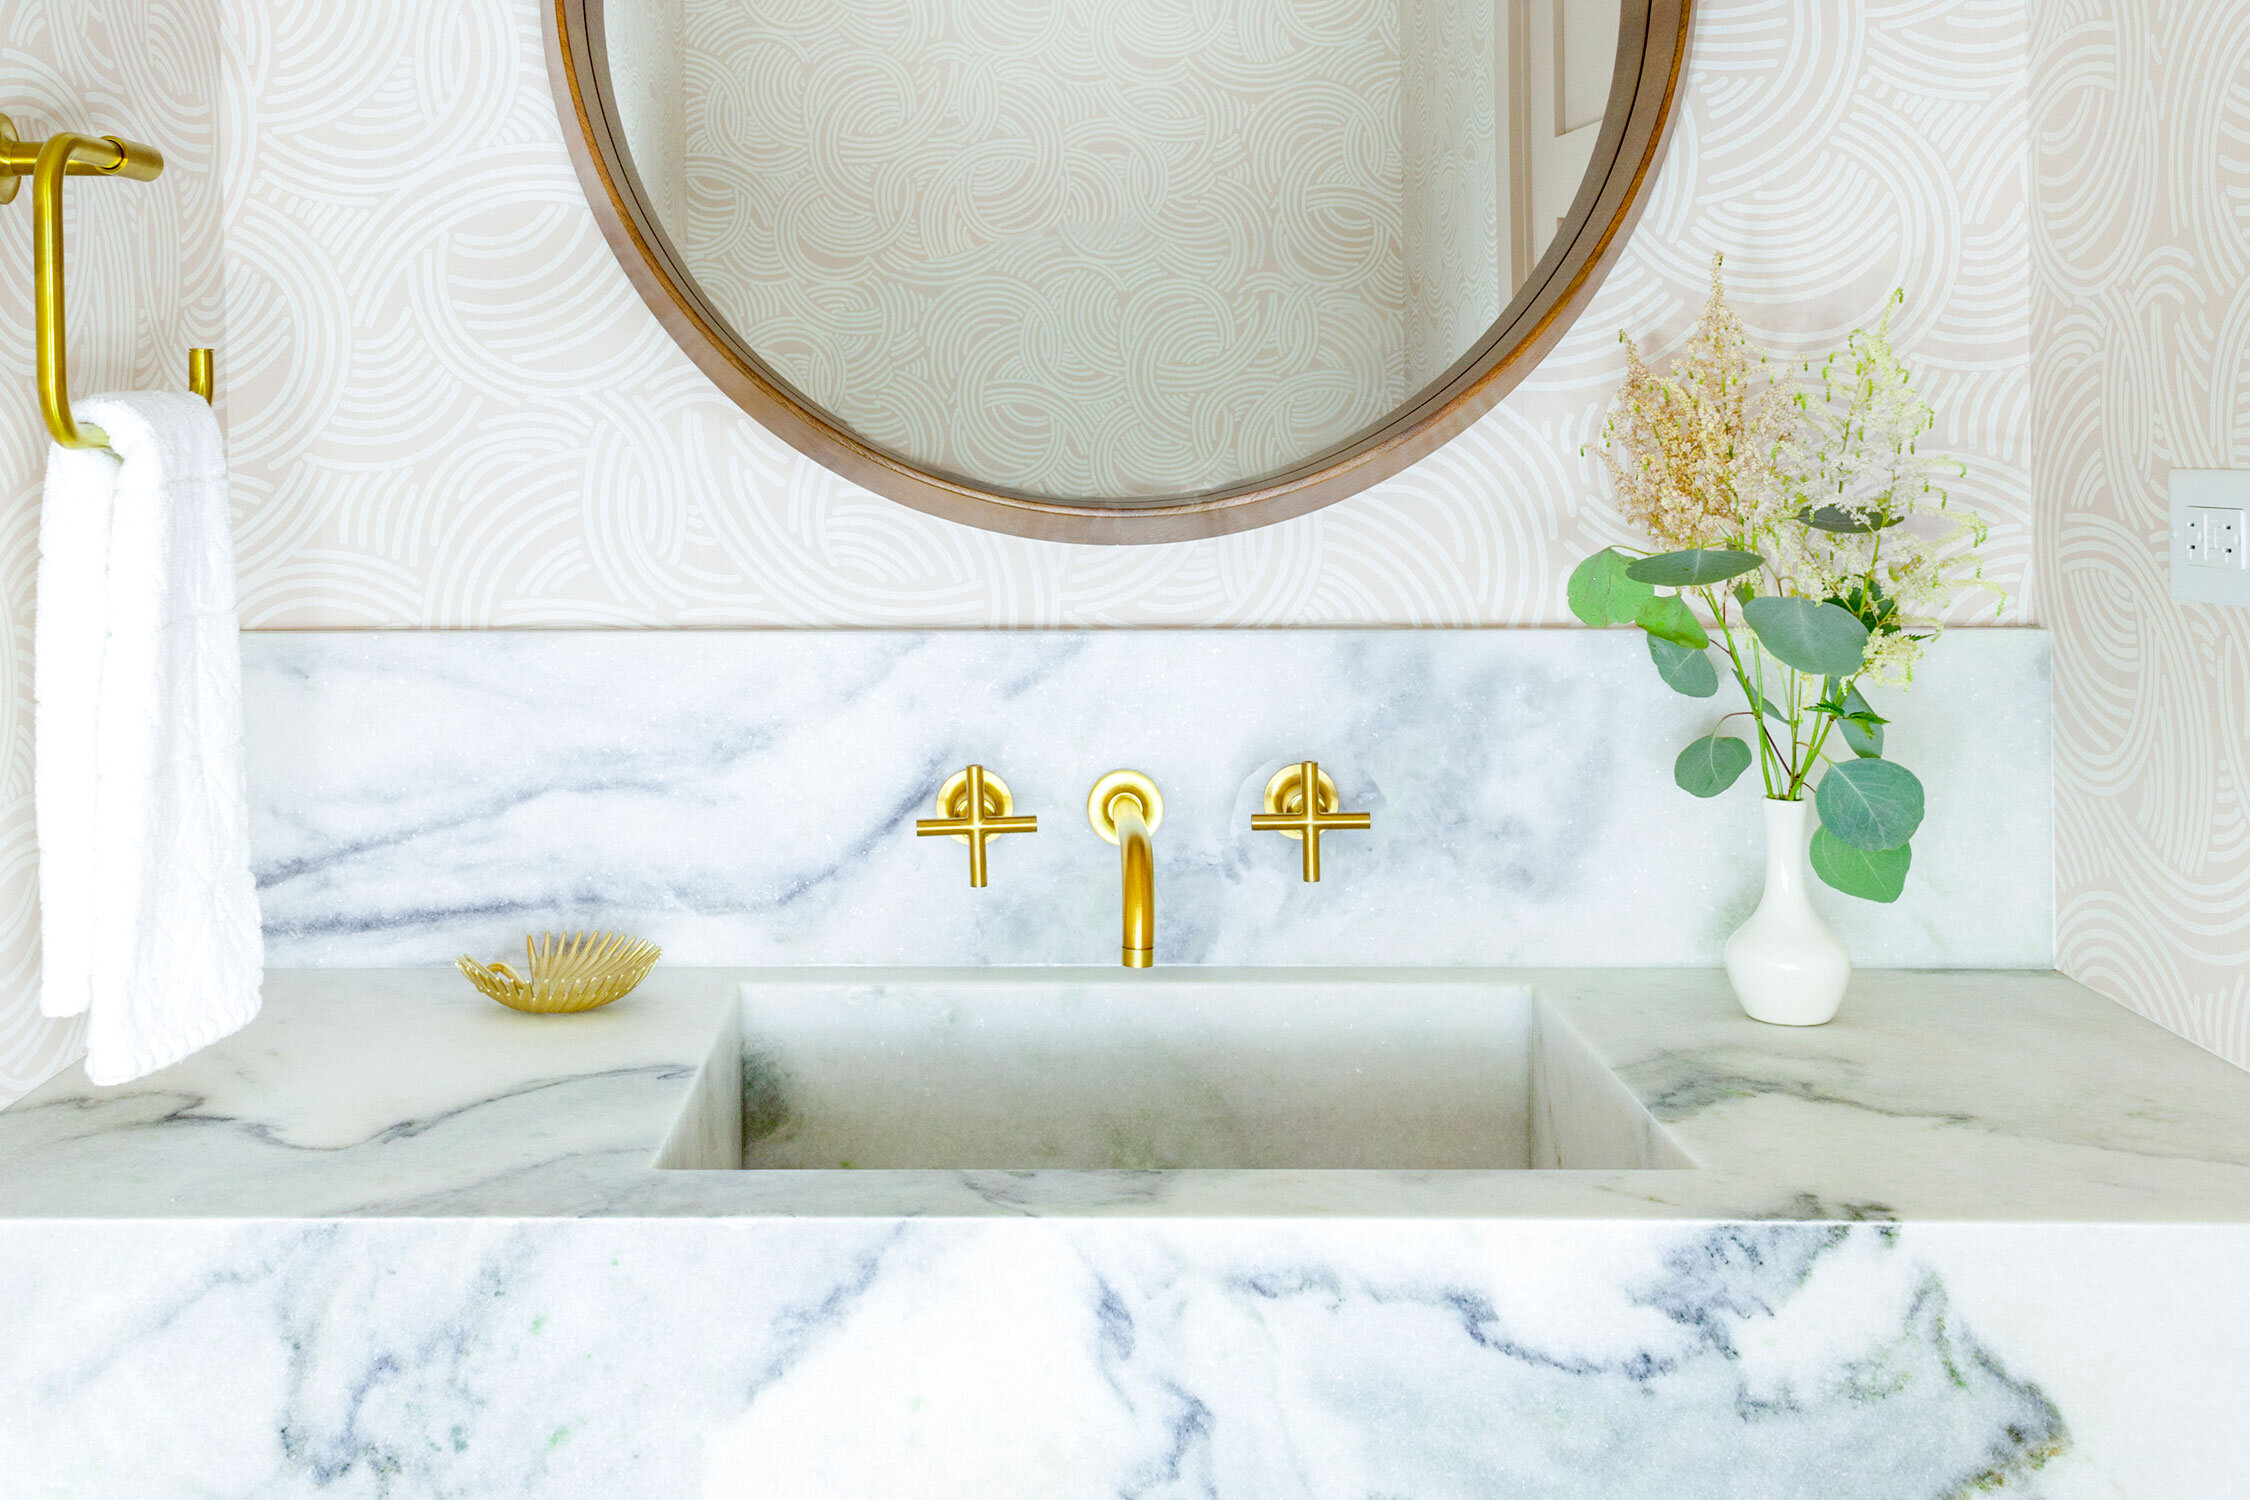 marble-vanity-with-gold-accents.jpg